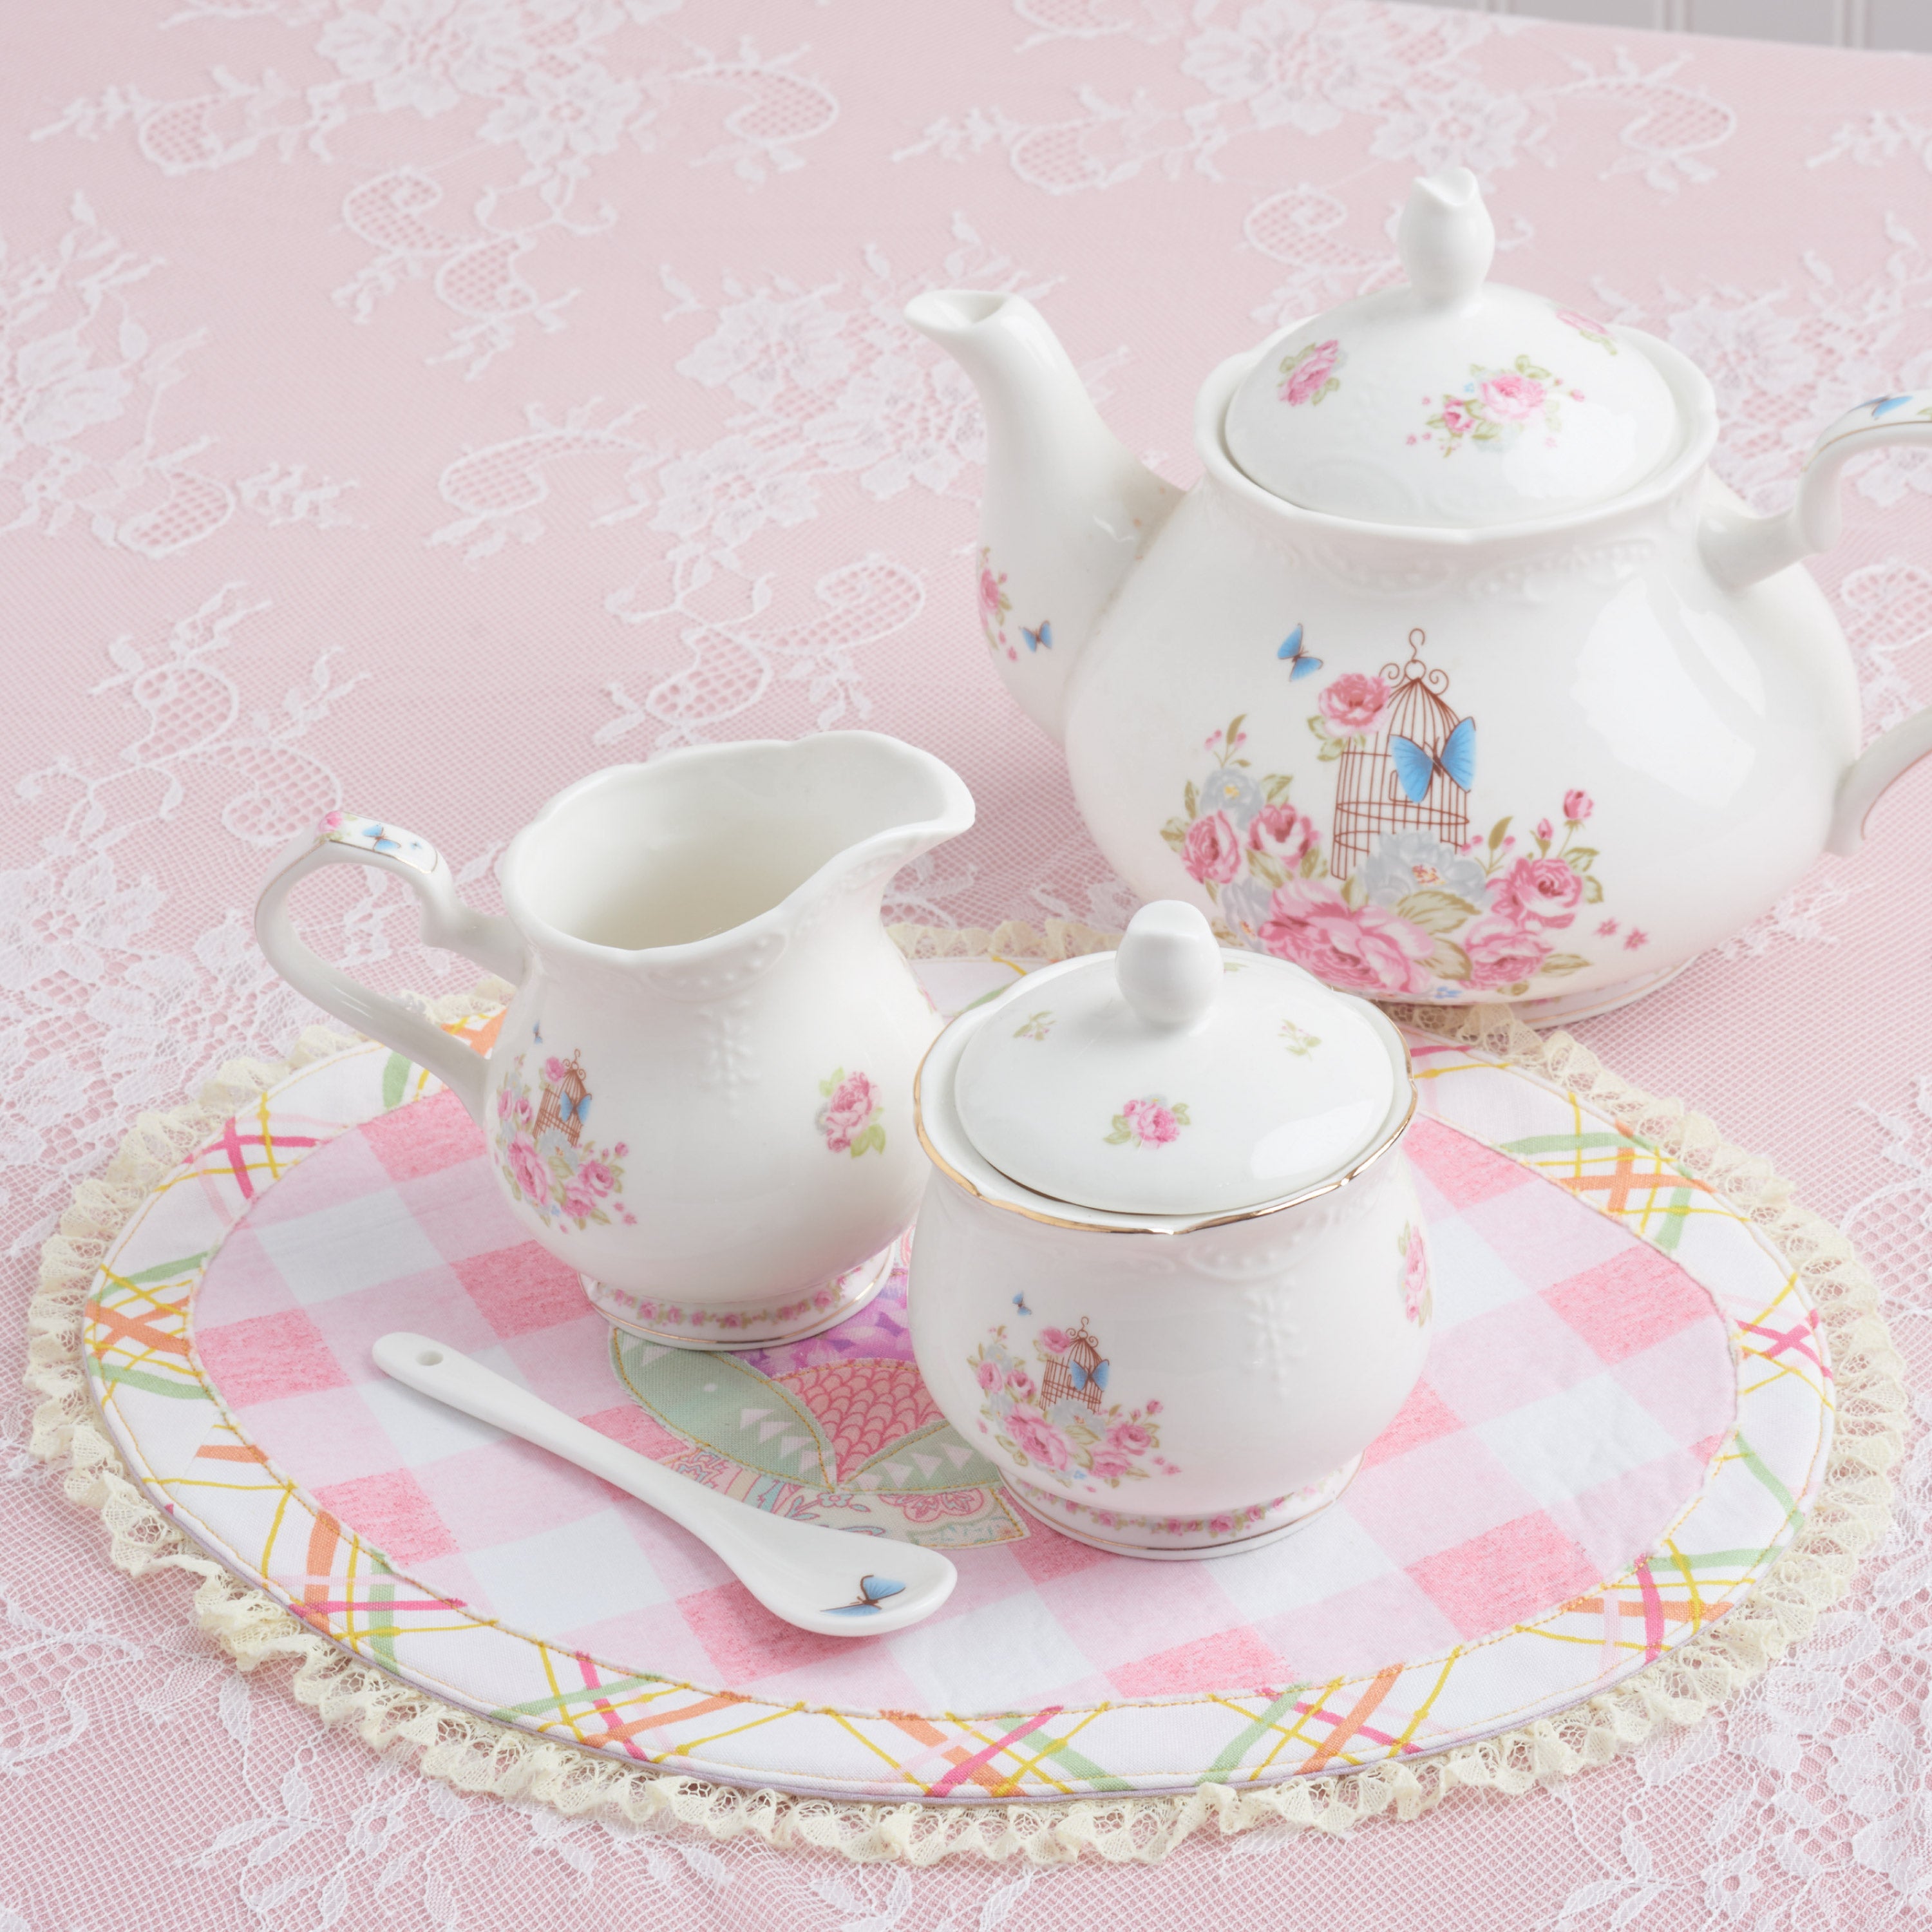 Simplicity 9573 Tabletop Accessories pattern from Jaycotts Sewing Supplies